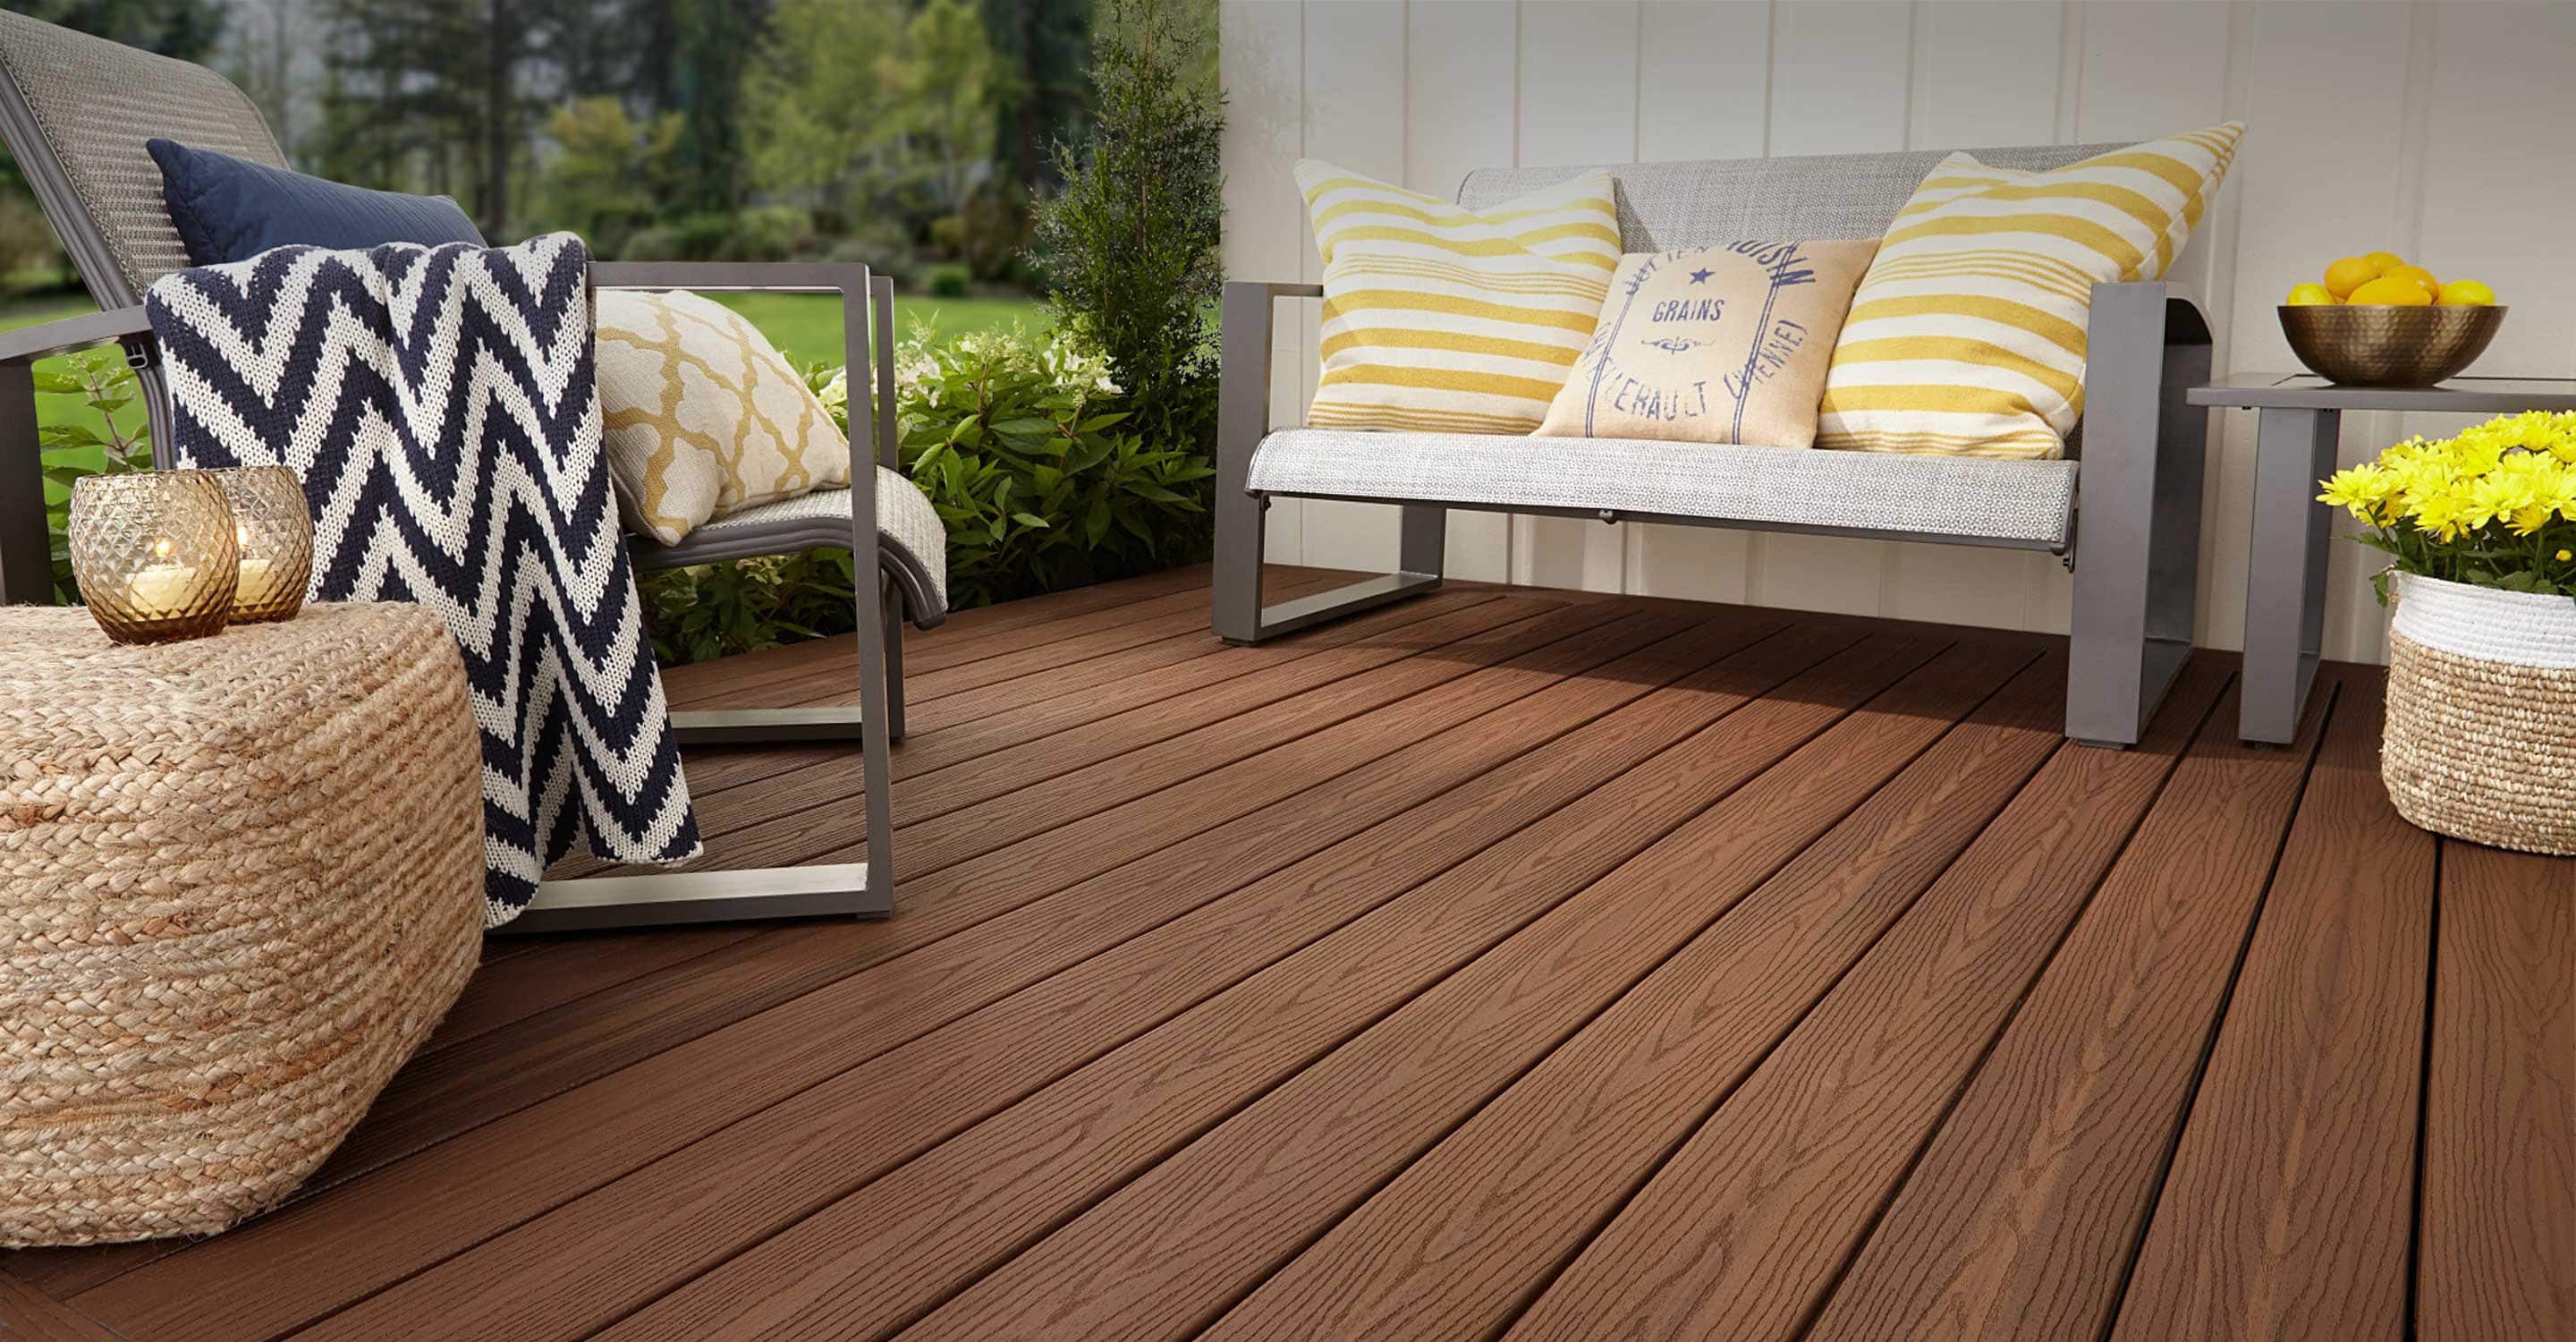 Is Composite Decking better than Wood Decking?